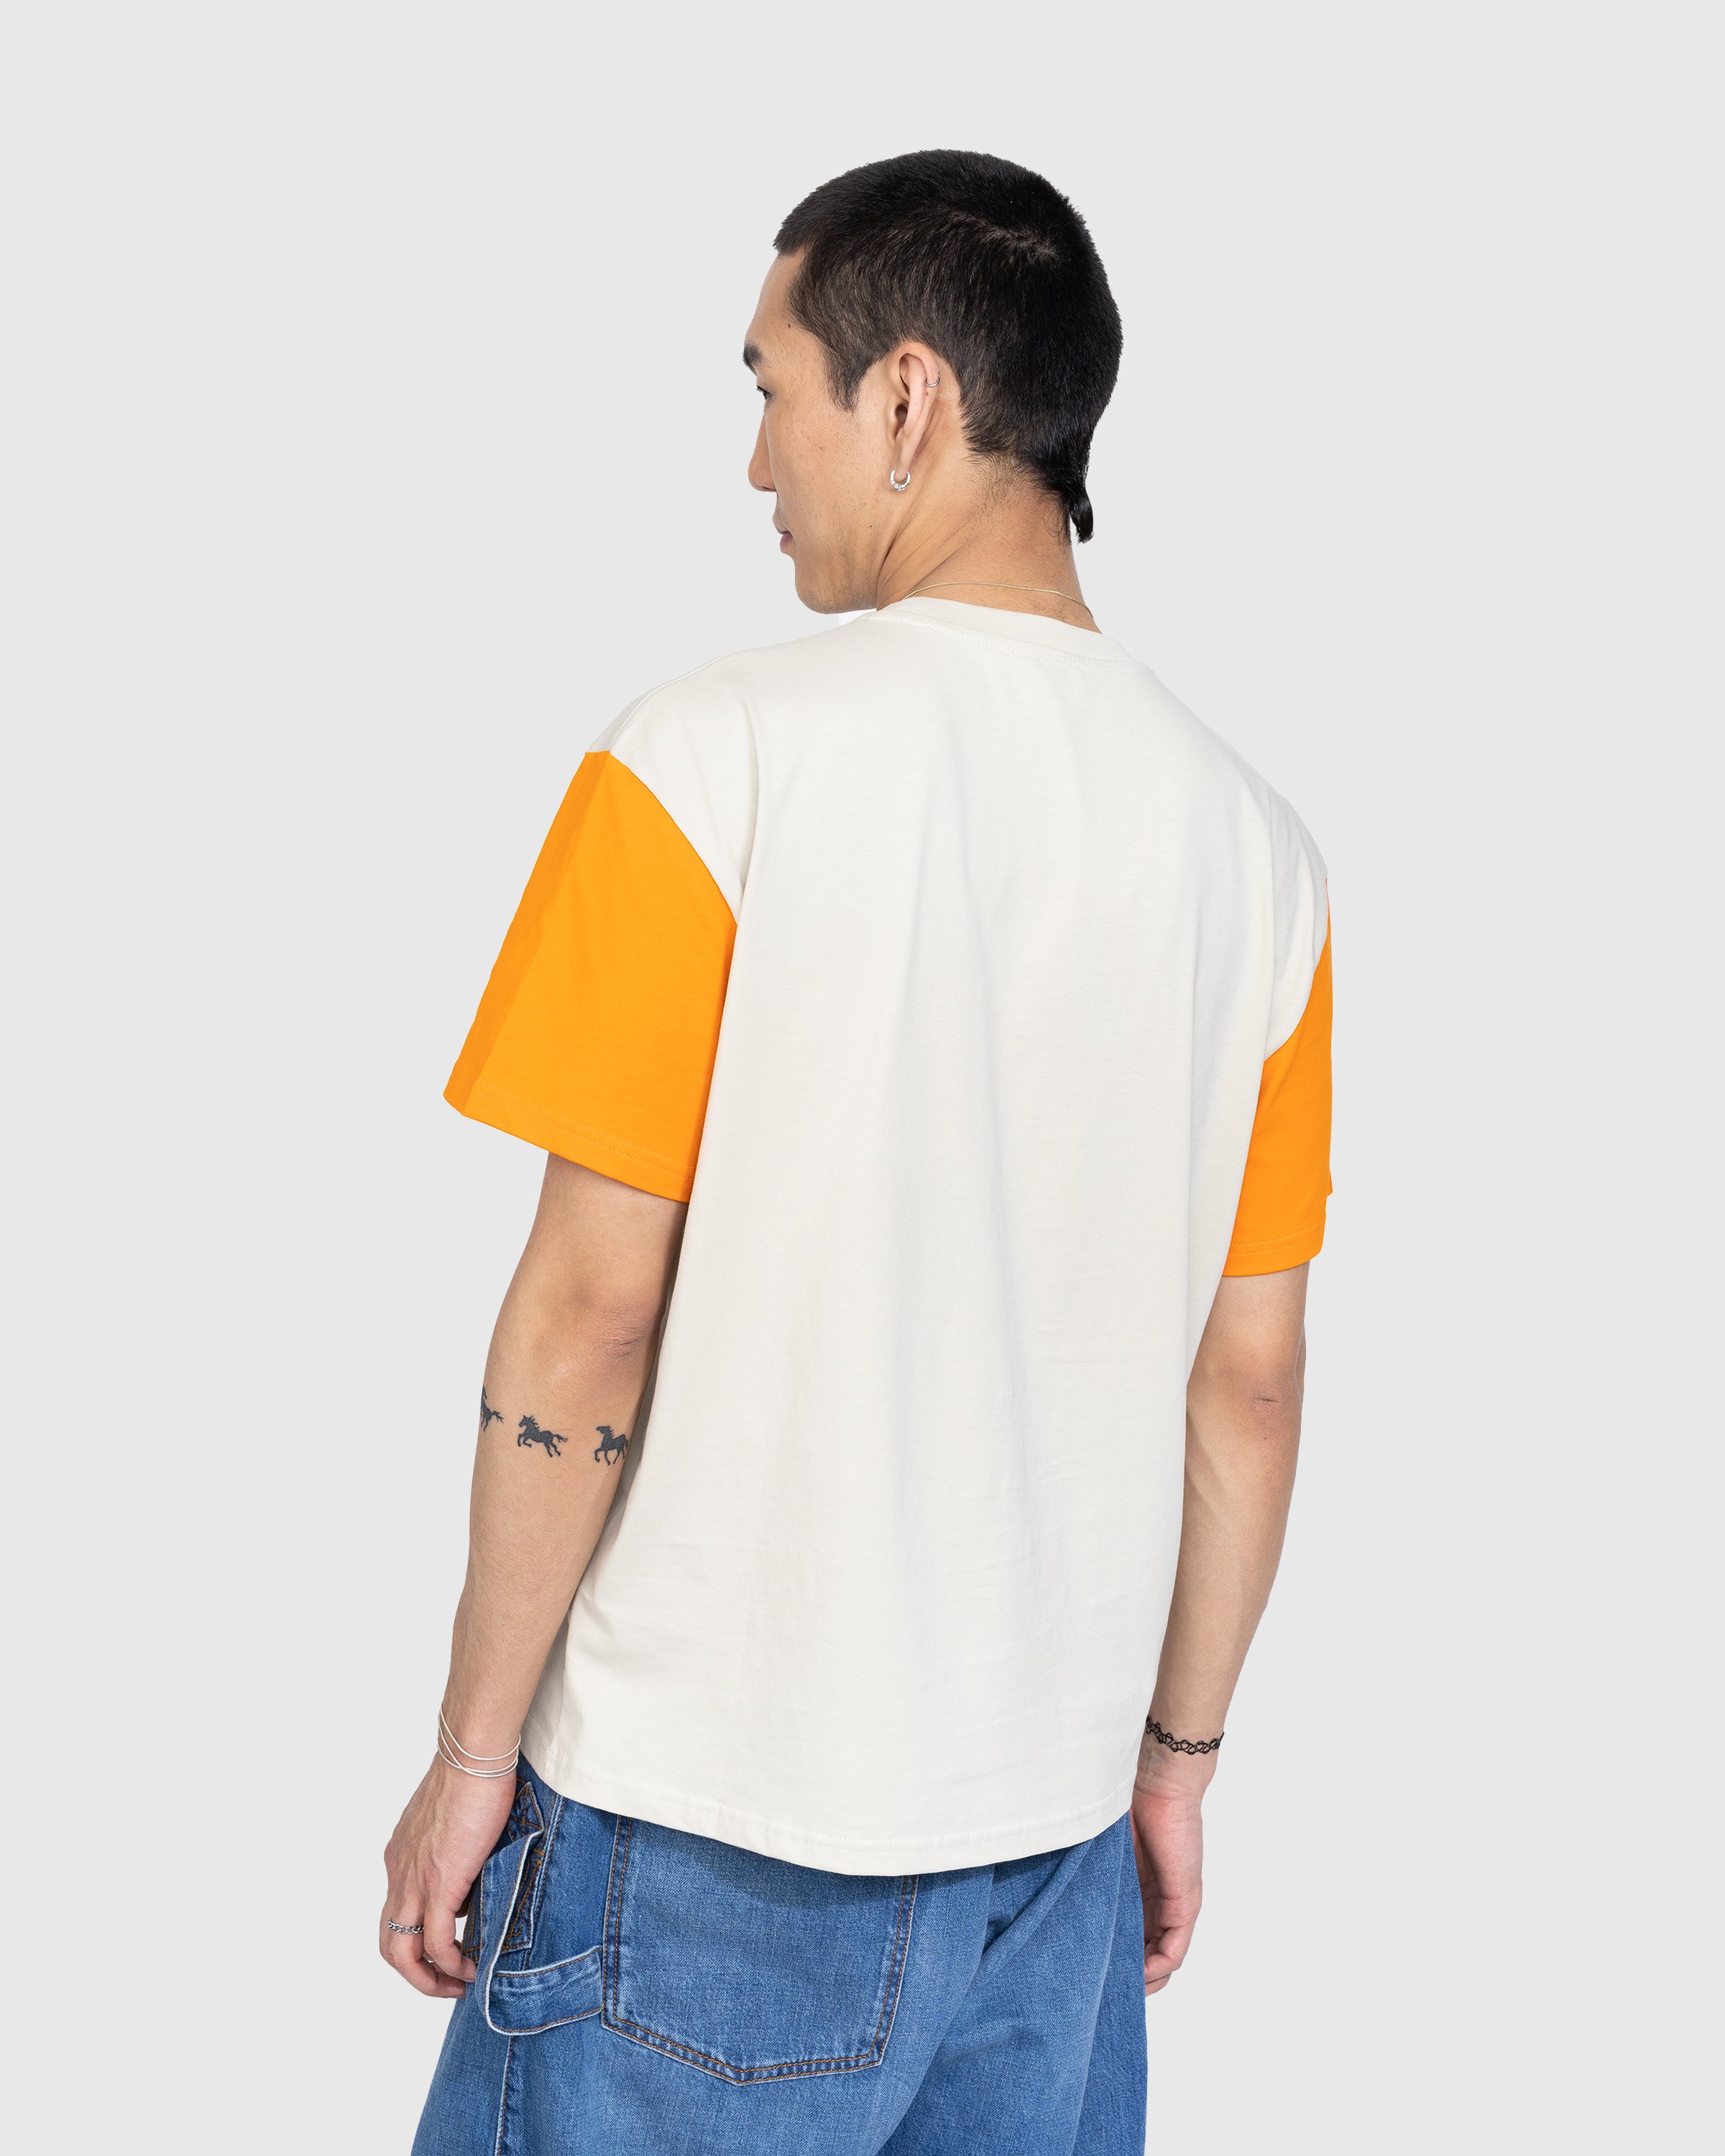 J.W. Anderson - Anchor Patch Contrast Sleeve T-Shirt - Clothing - Orange - Image 3